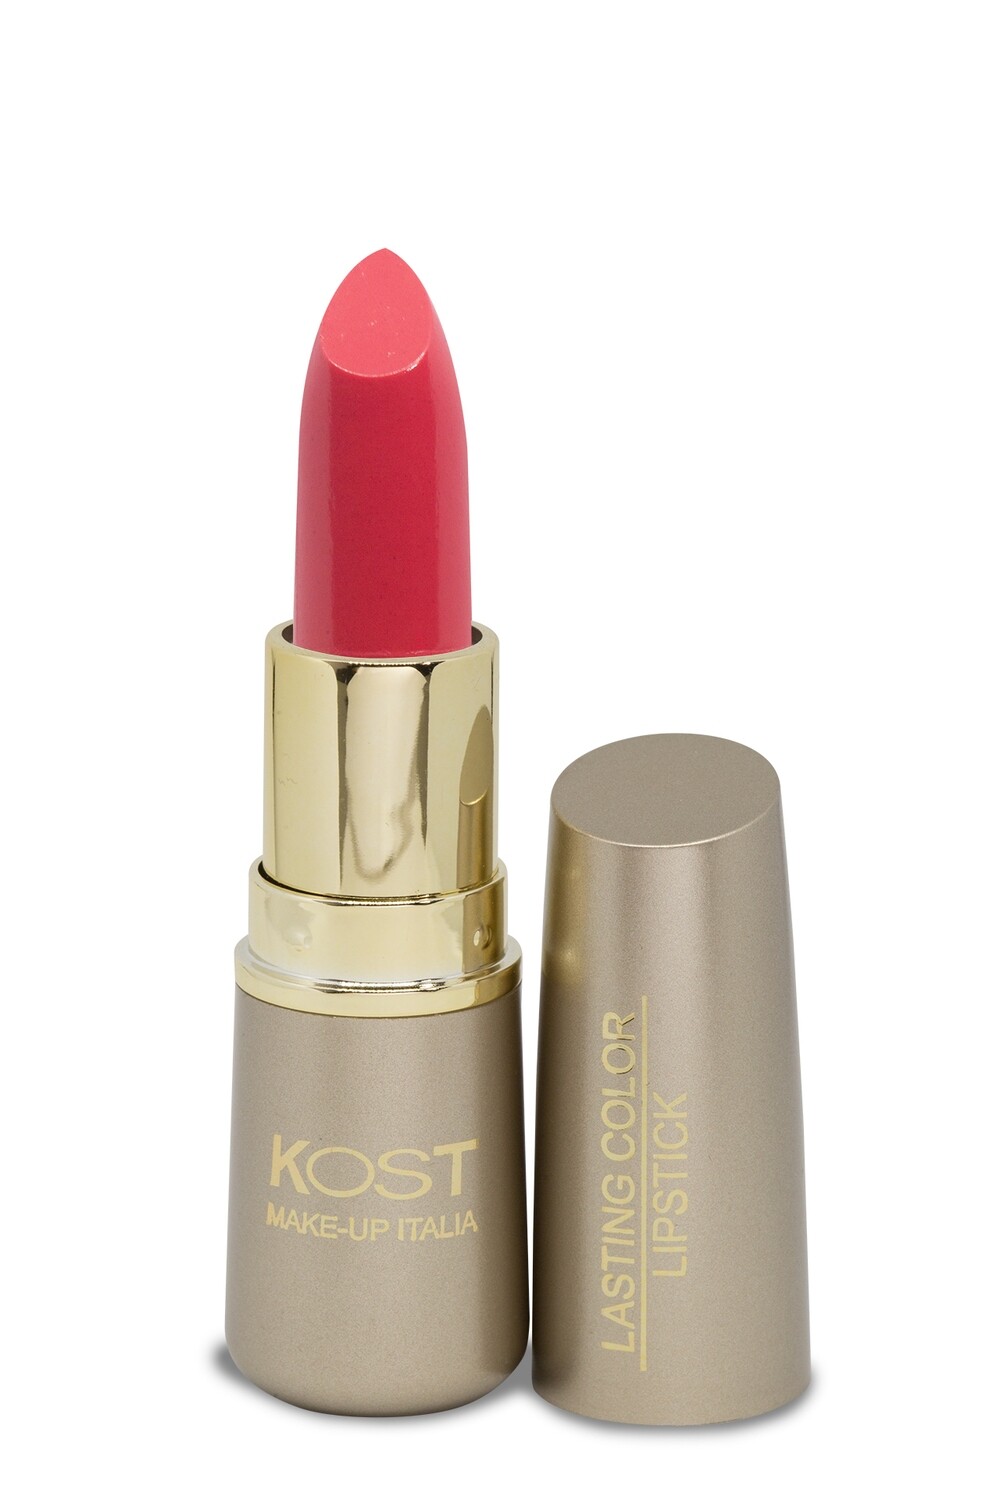 Kost Rossetto lasting color N5